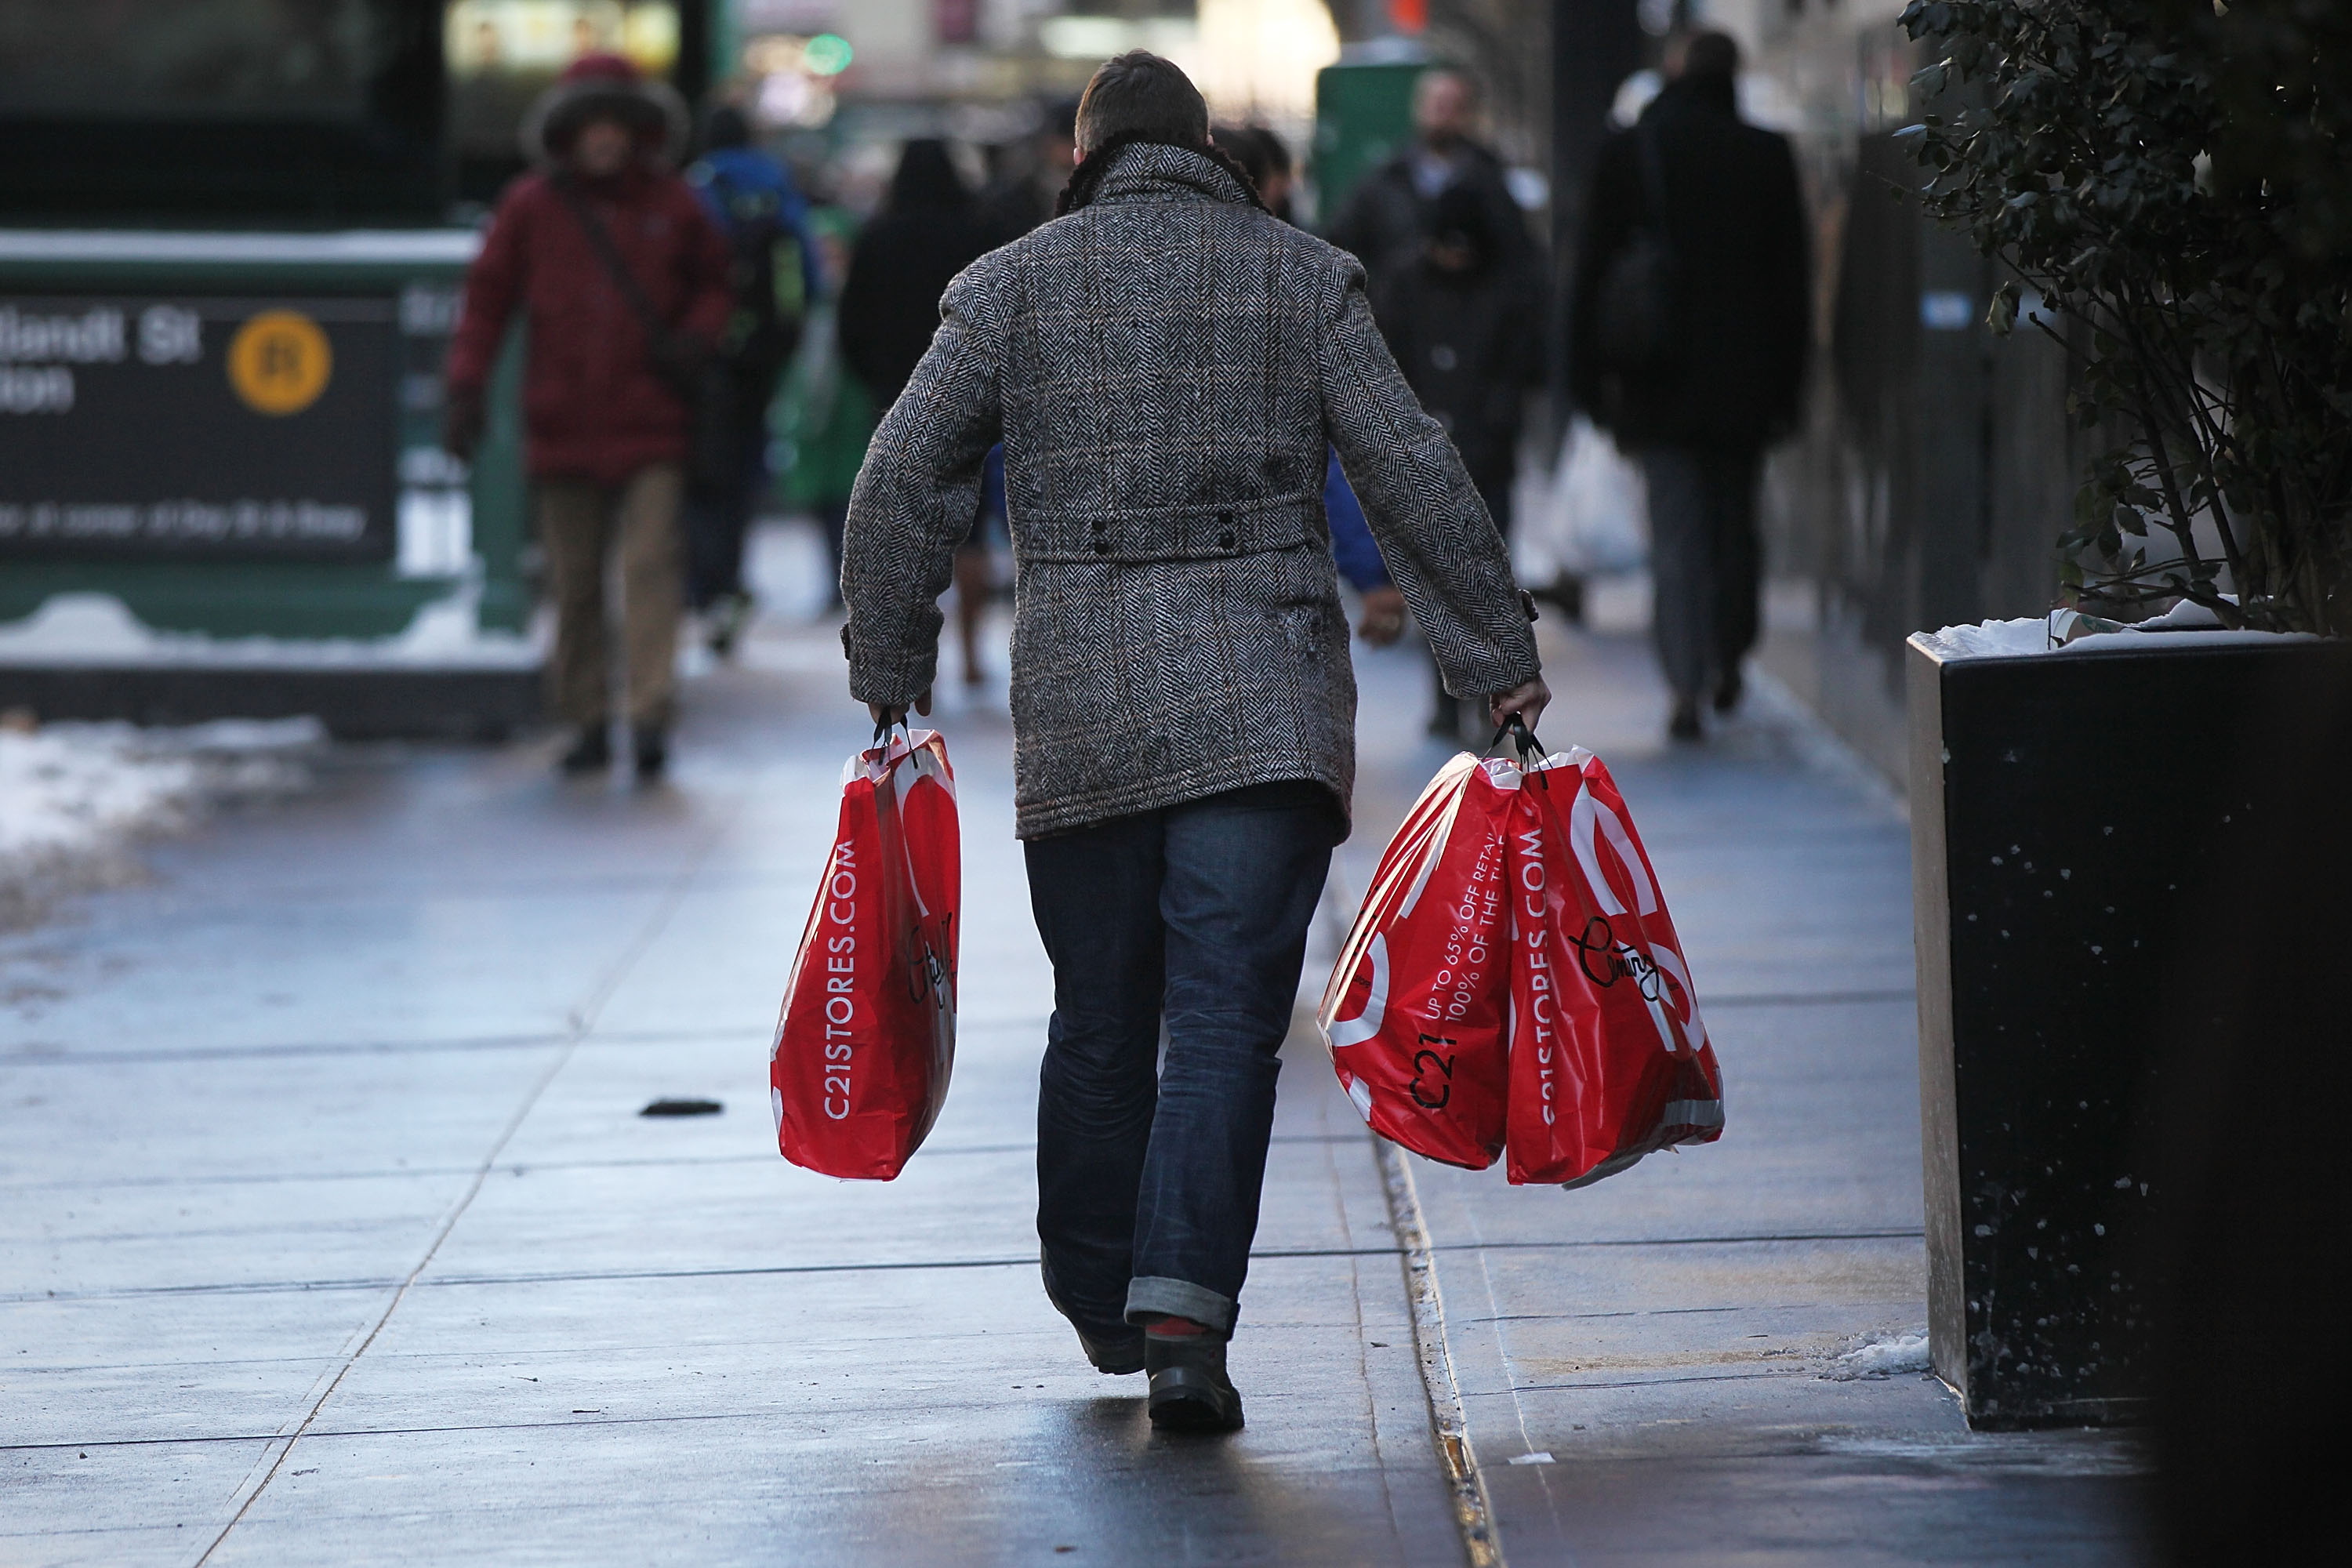 Consumer spending is still growing, but for how long?